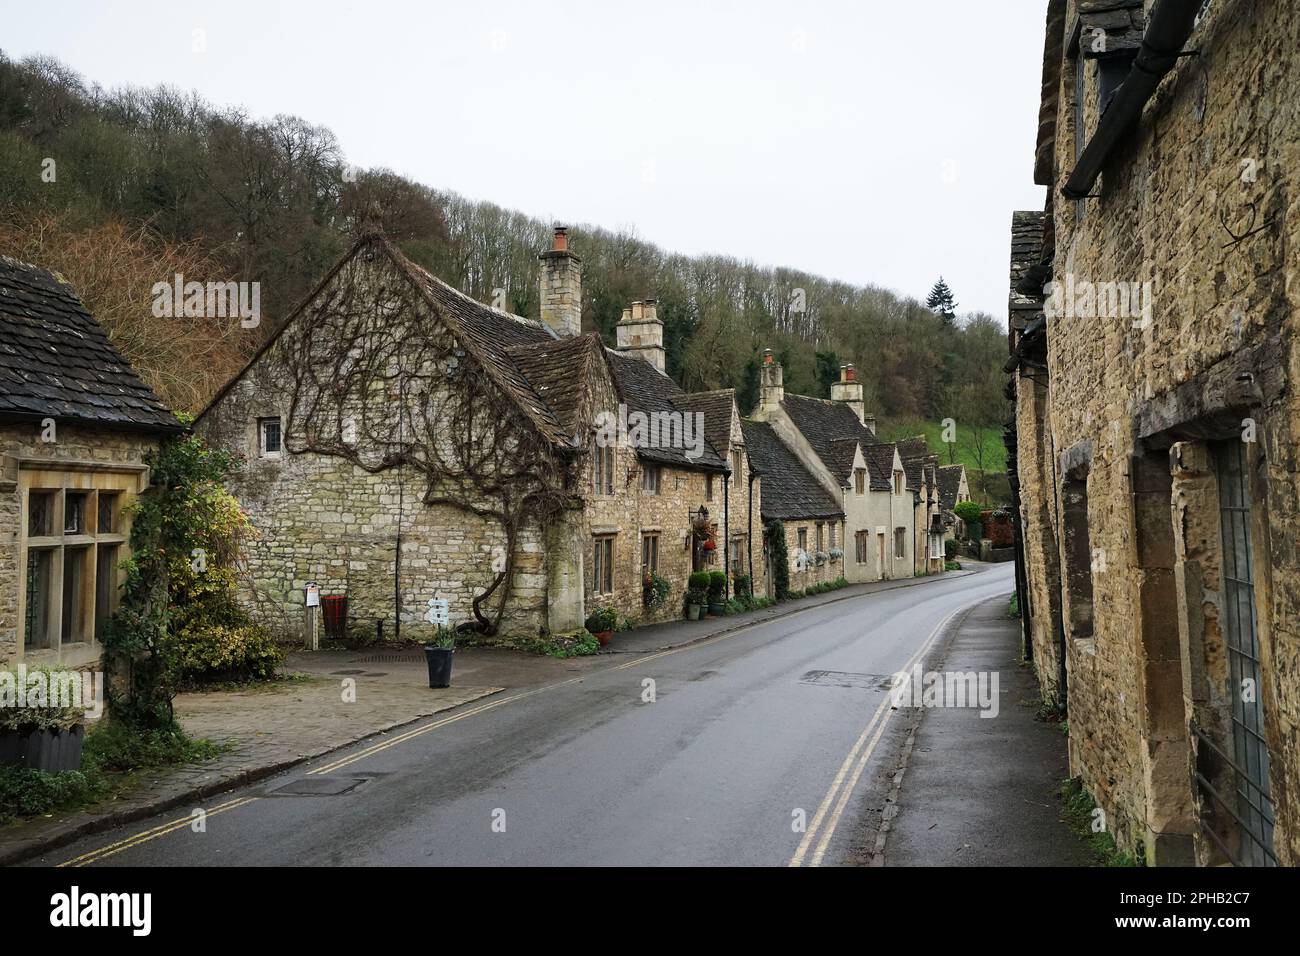 Exterior ancient architecture and European design of 'Castle Combe village' conservation area on the southernmost edge of the Cotswold- England, UK Stock Photo